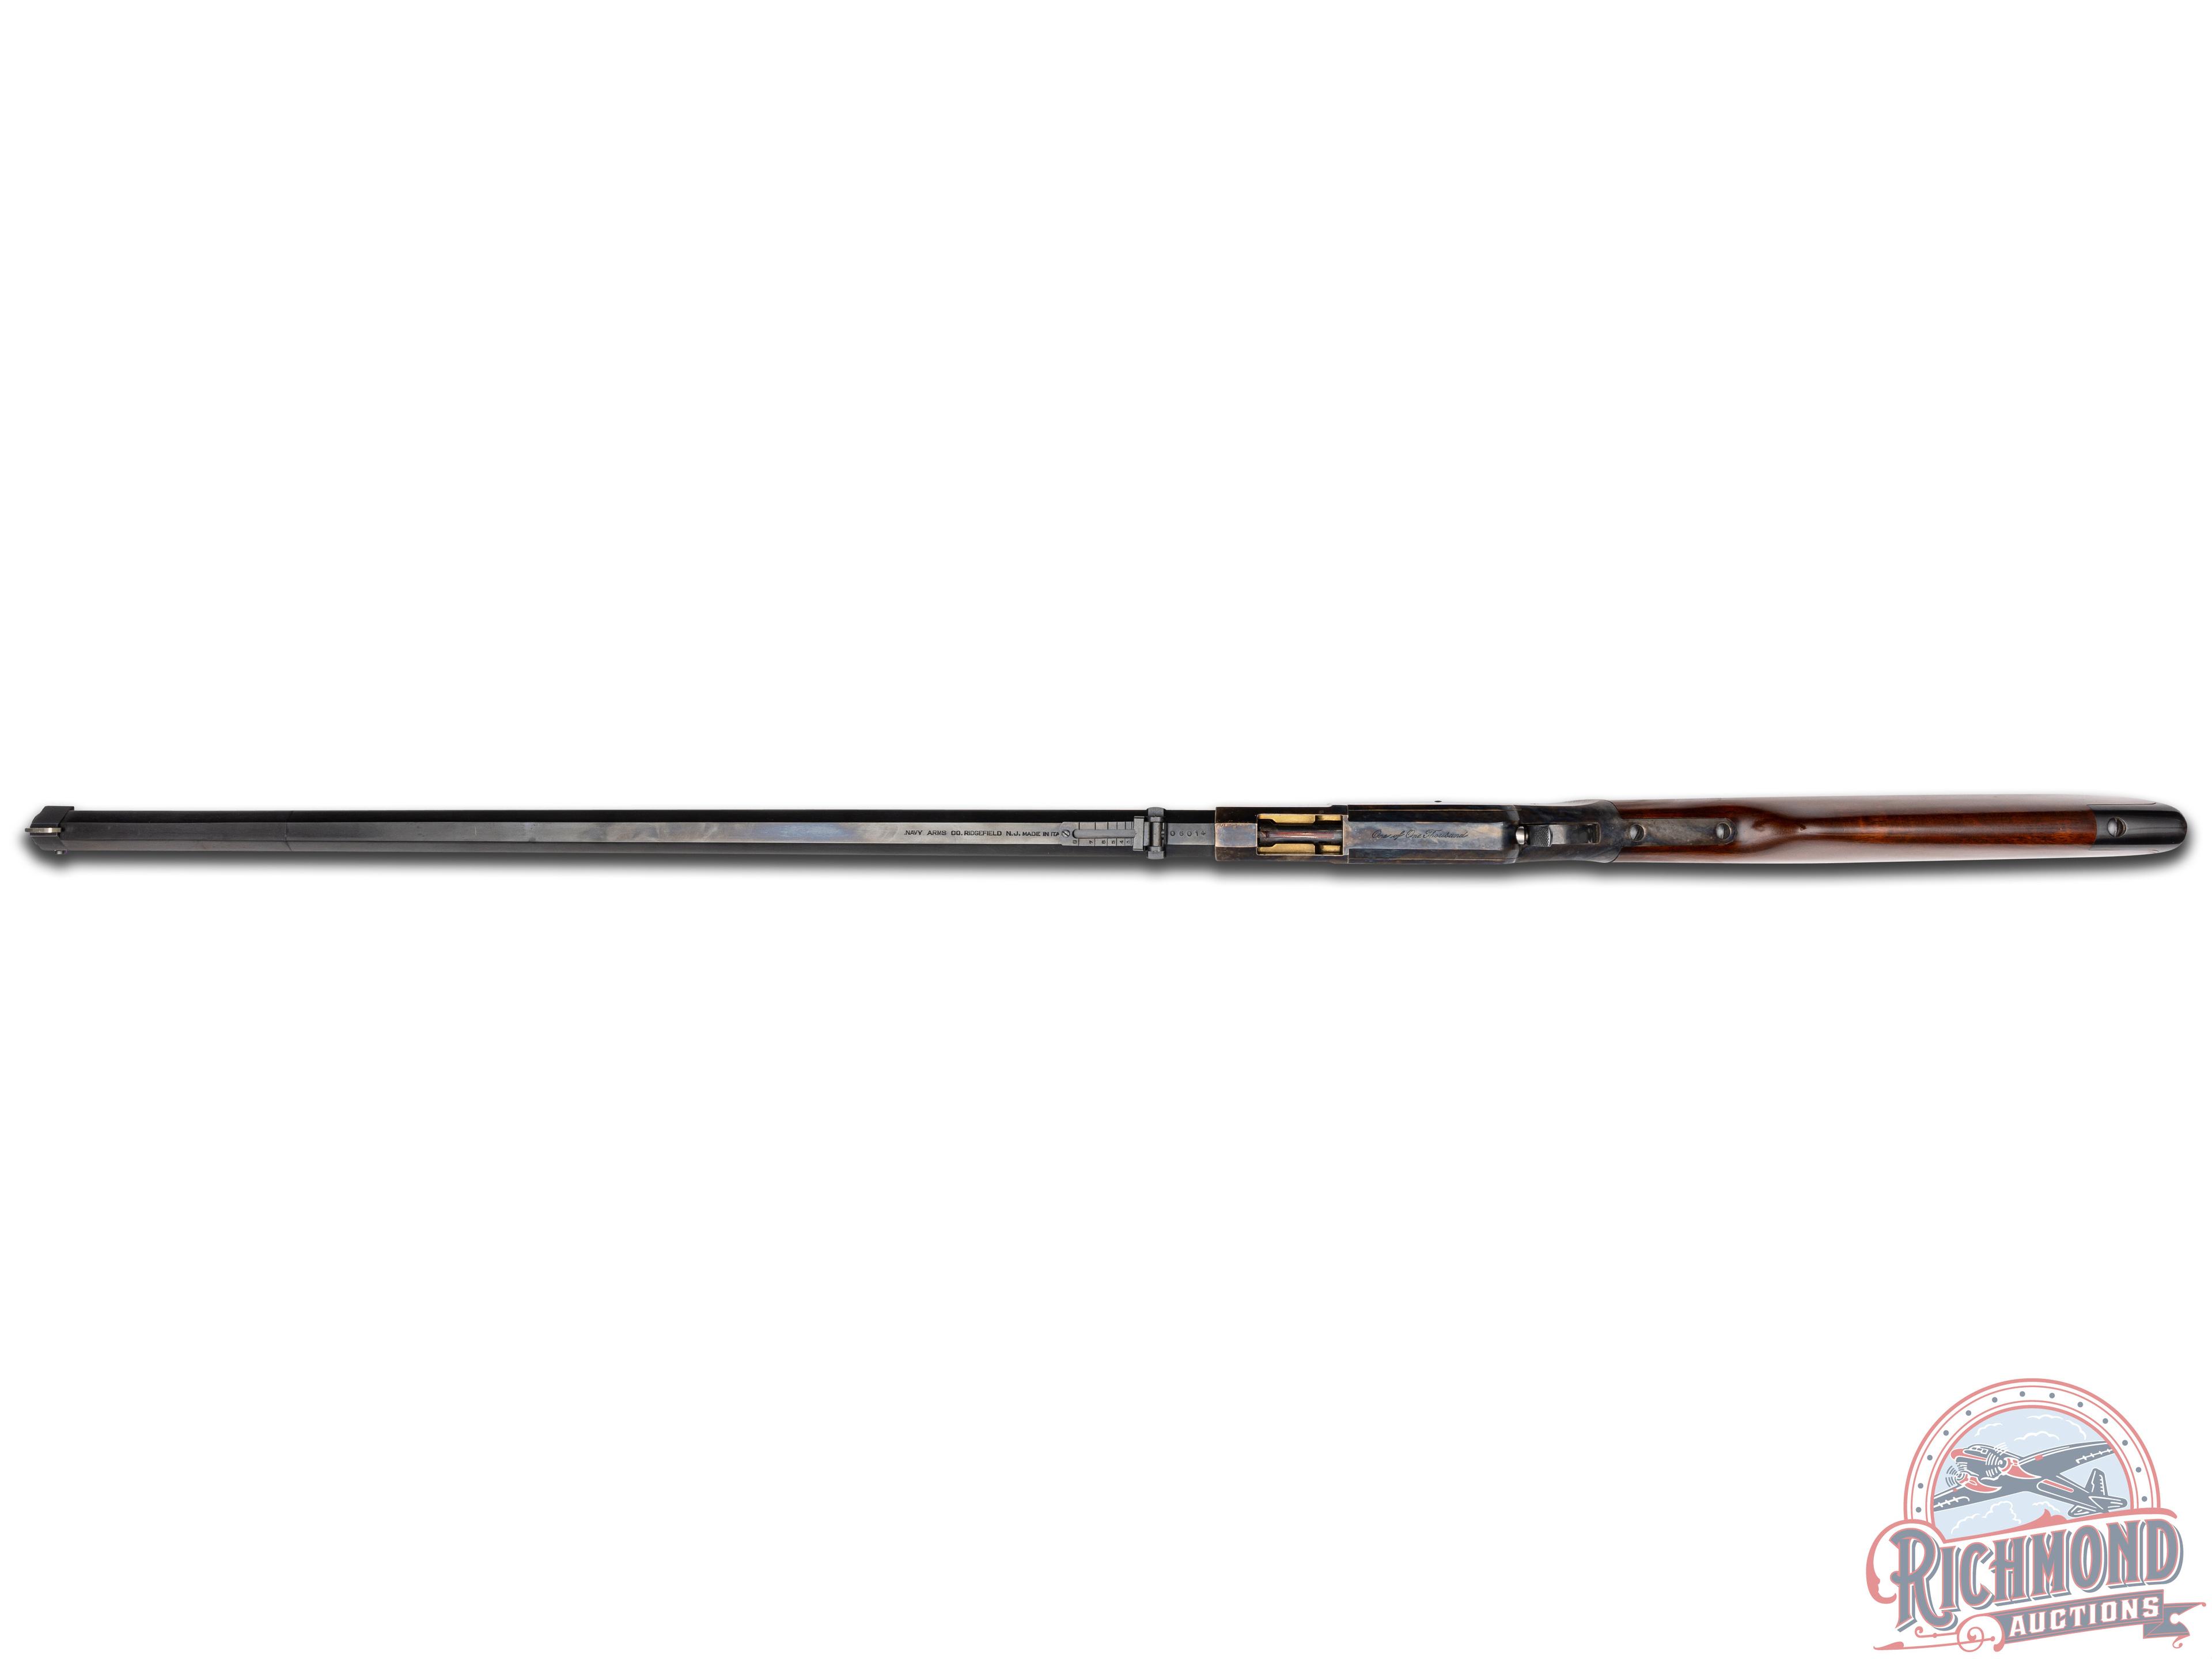 Navy Arms Model 1860 Henry Lever Action .44-40 WCF Rifle 1 of 1000